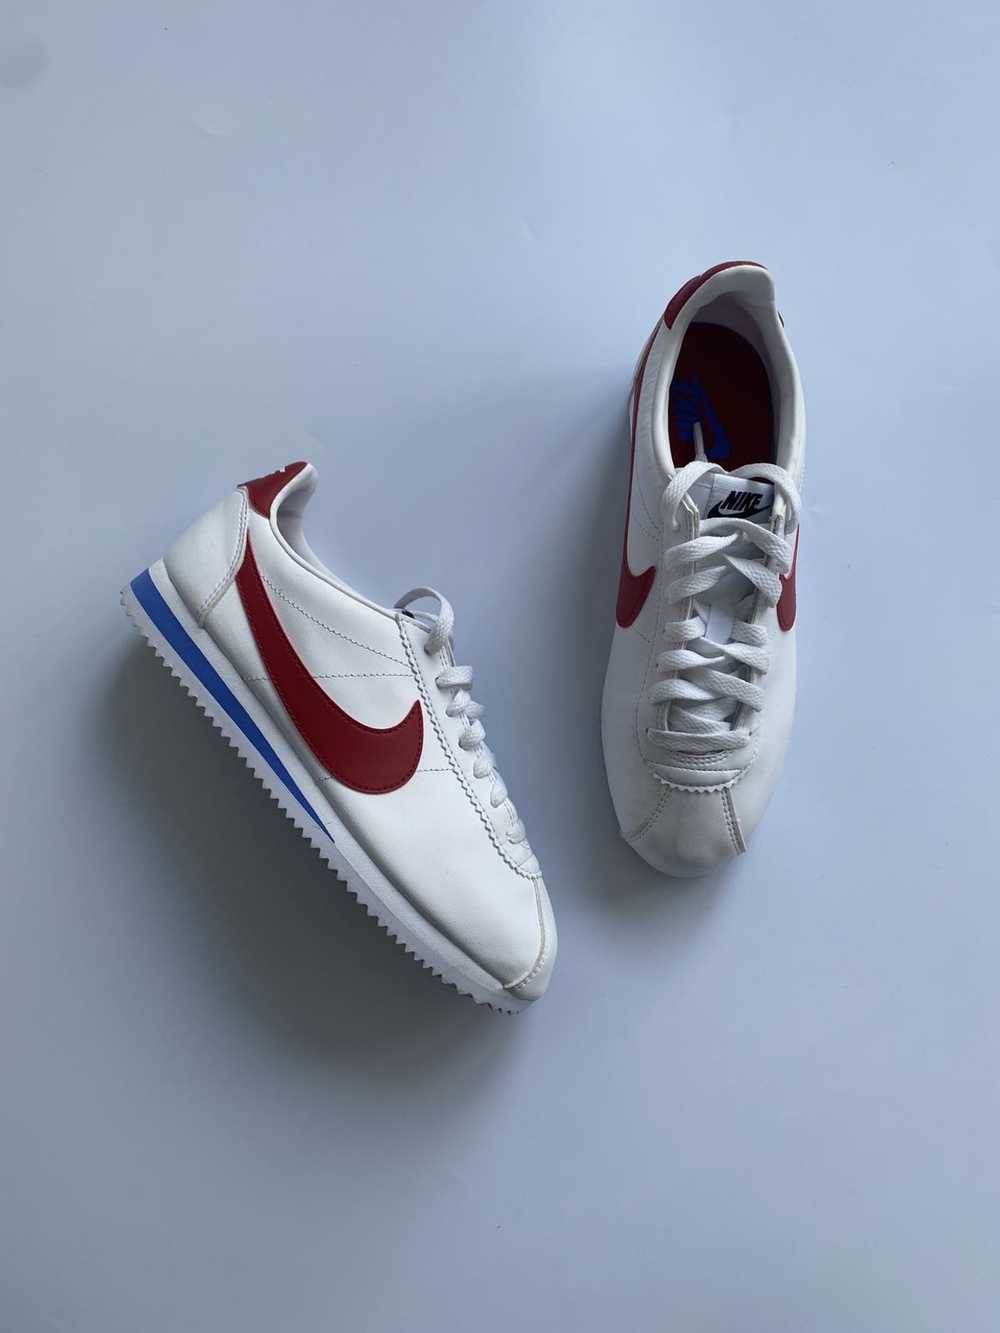 Nike Nike Cortez “Forrest Gump” sneakers - image 2